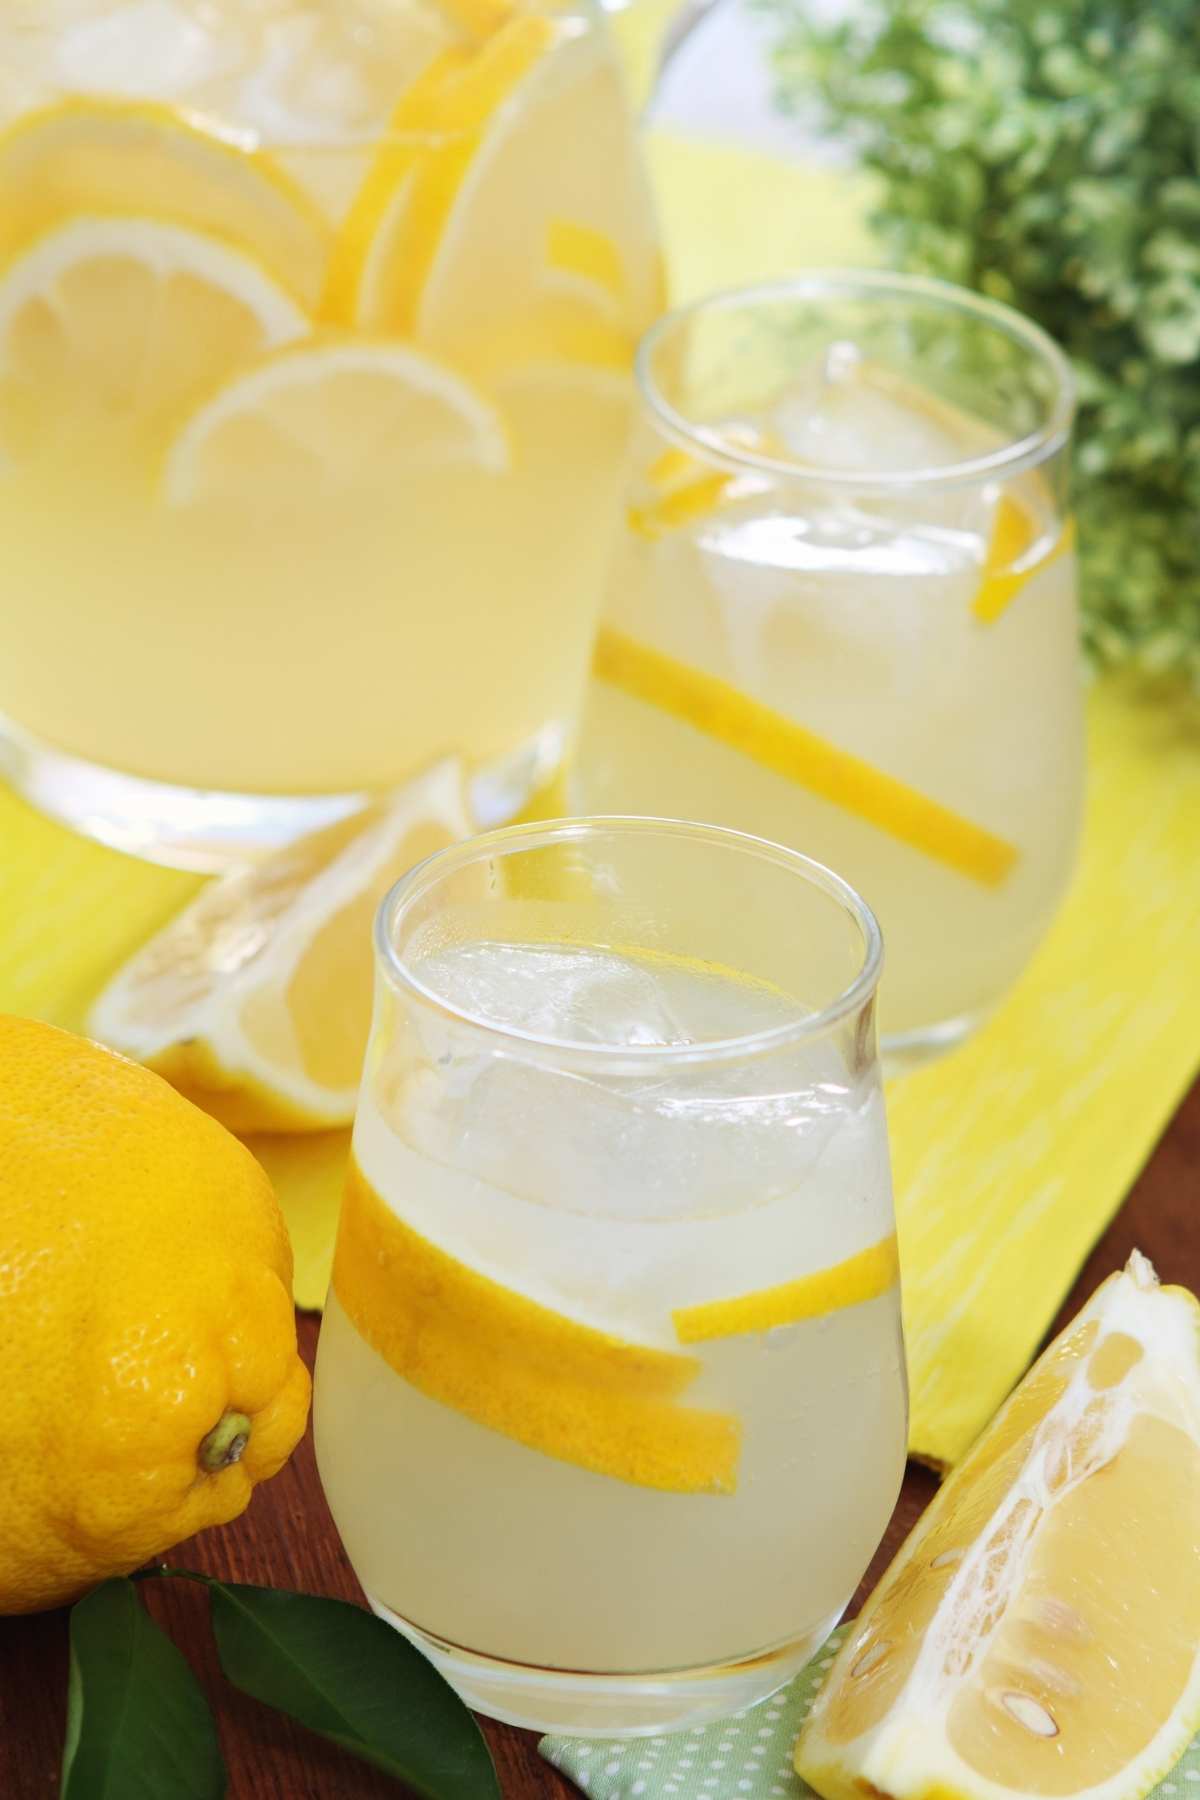 This tequila lemonade is perfect for summer get-togethers outside on the patio or in the garden. It’s zesty, refreshing and features the delicious and distinctive flavor of tequila.